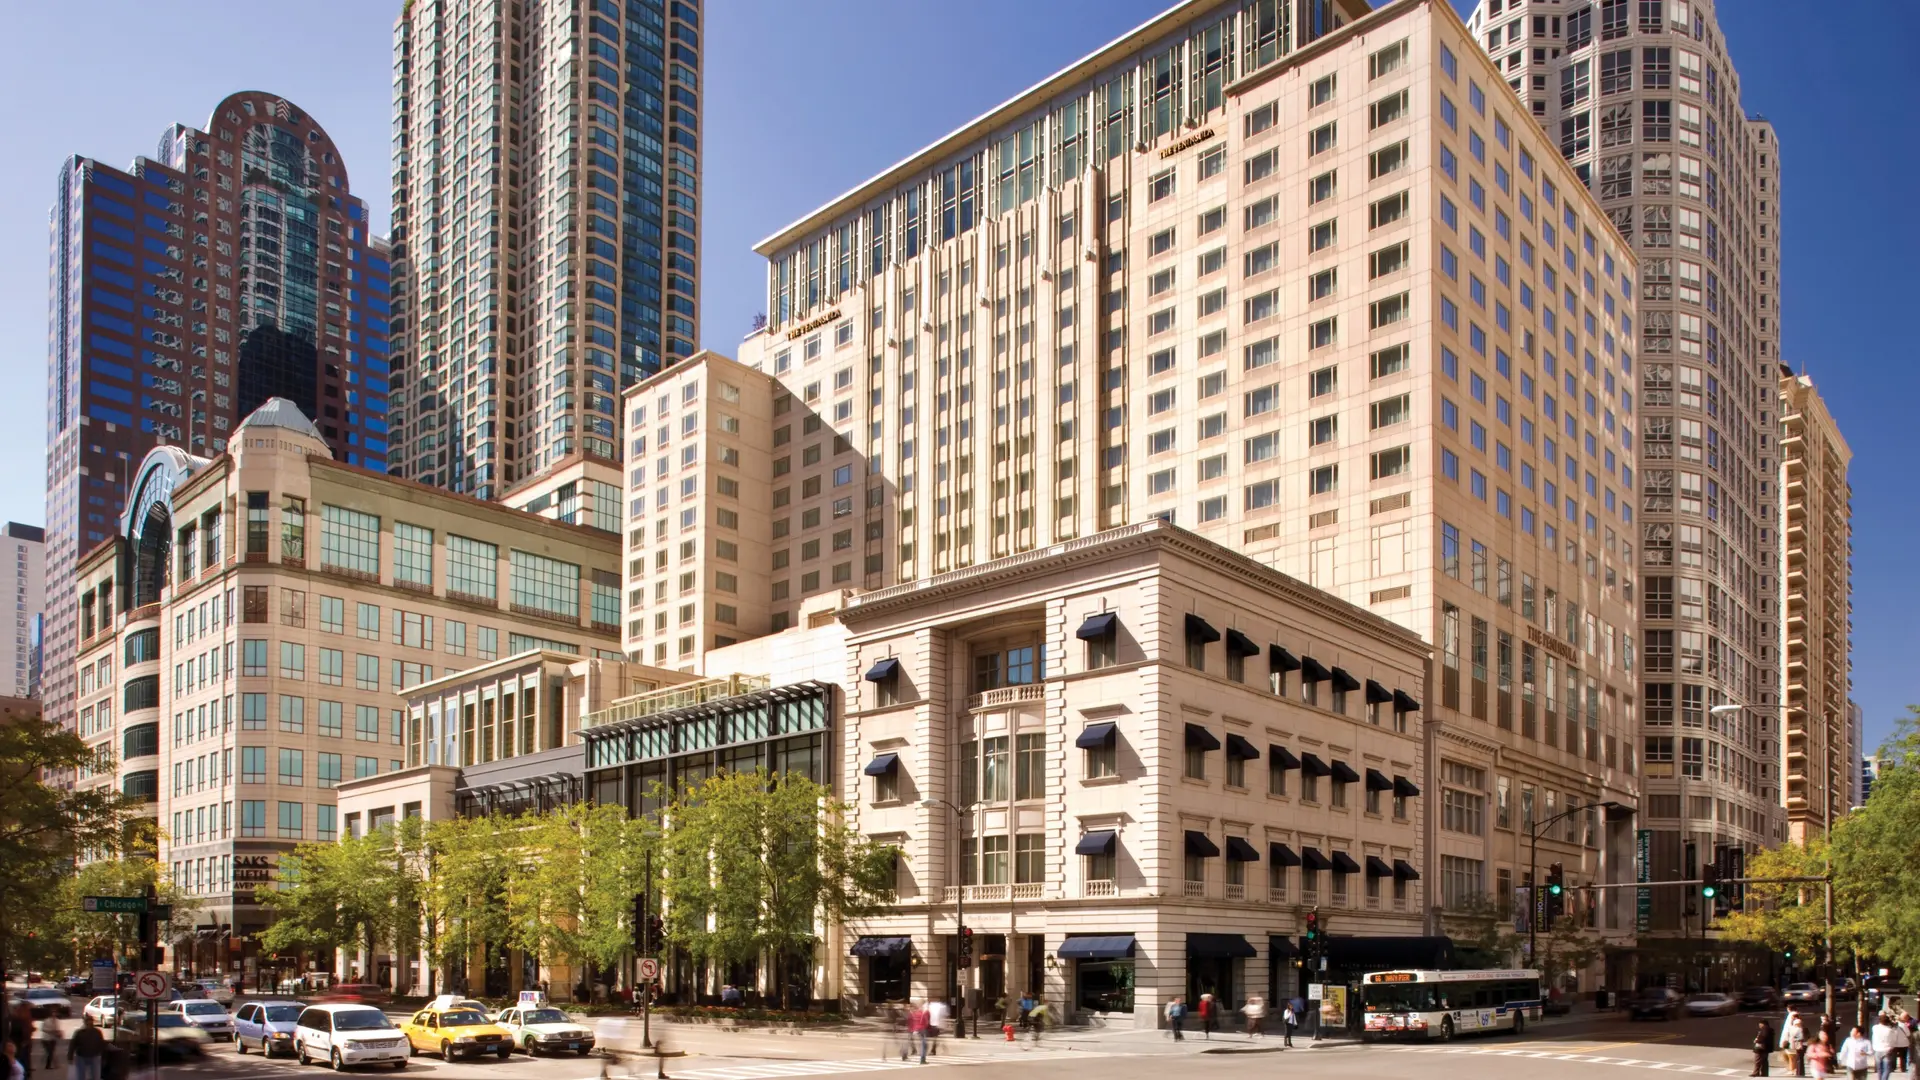 Hotel review Location' - The Peninsula Chicago - 1